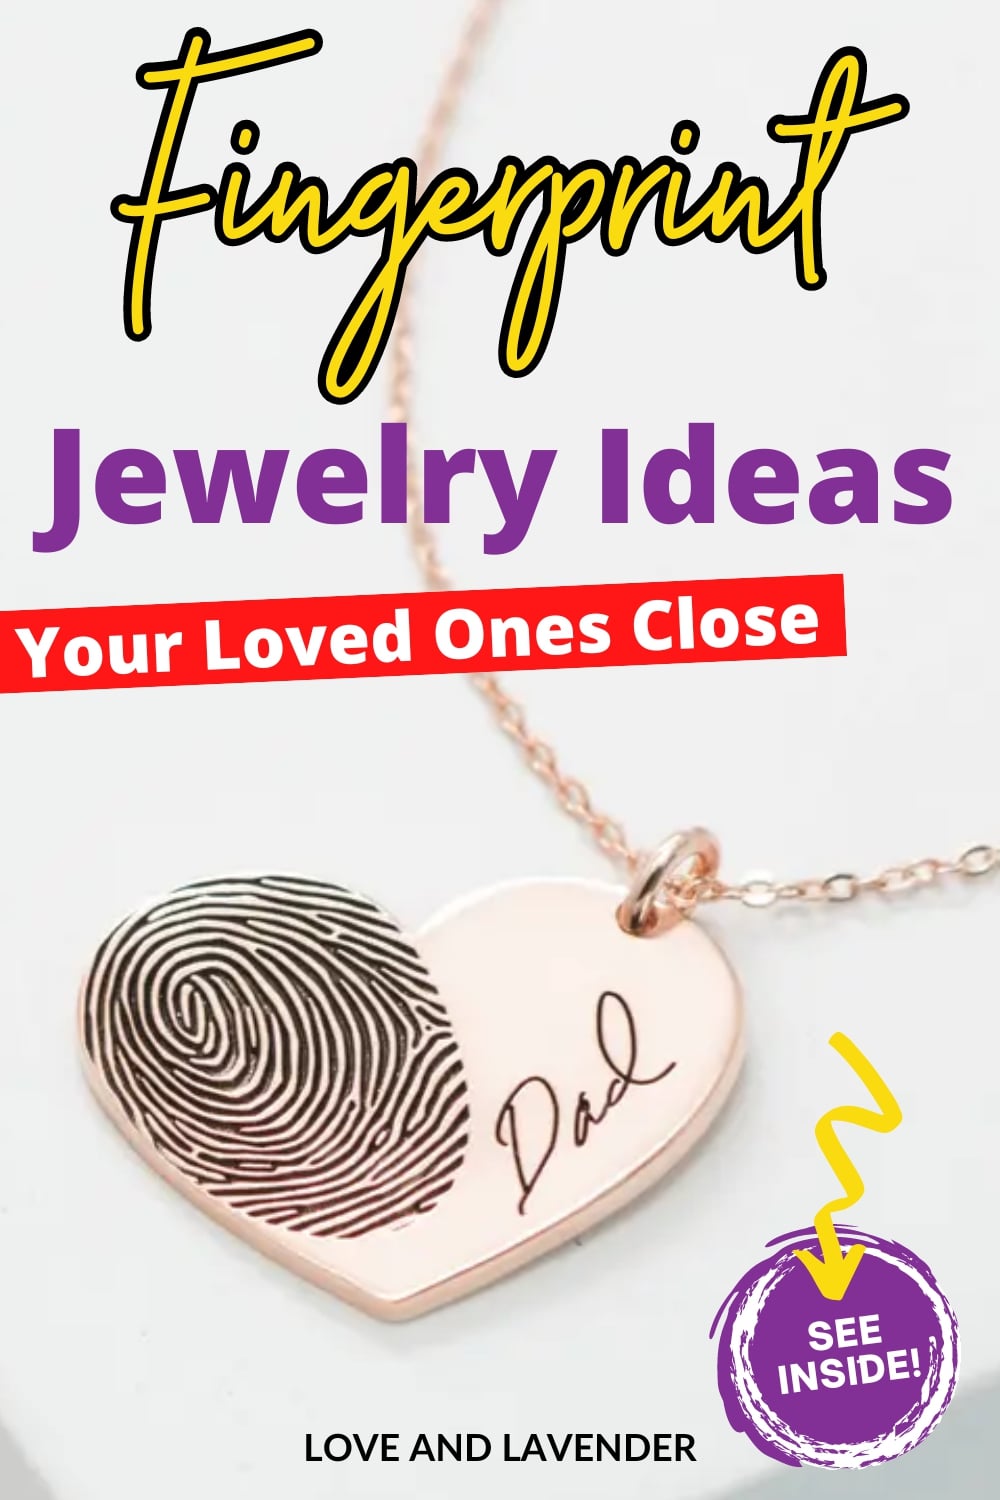 The fingerprint keepsake jewelry ideas we’ve put together are of the highest caliber of quality and craftsmanship. Find the perfect piece to cherish forever through a ring, bracelet, or even cufflinks! See it here!